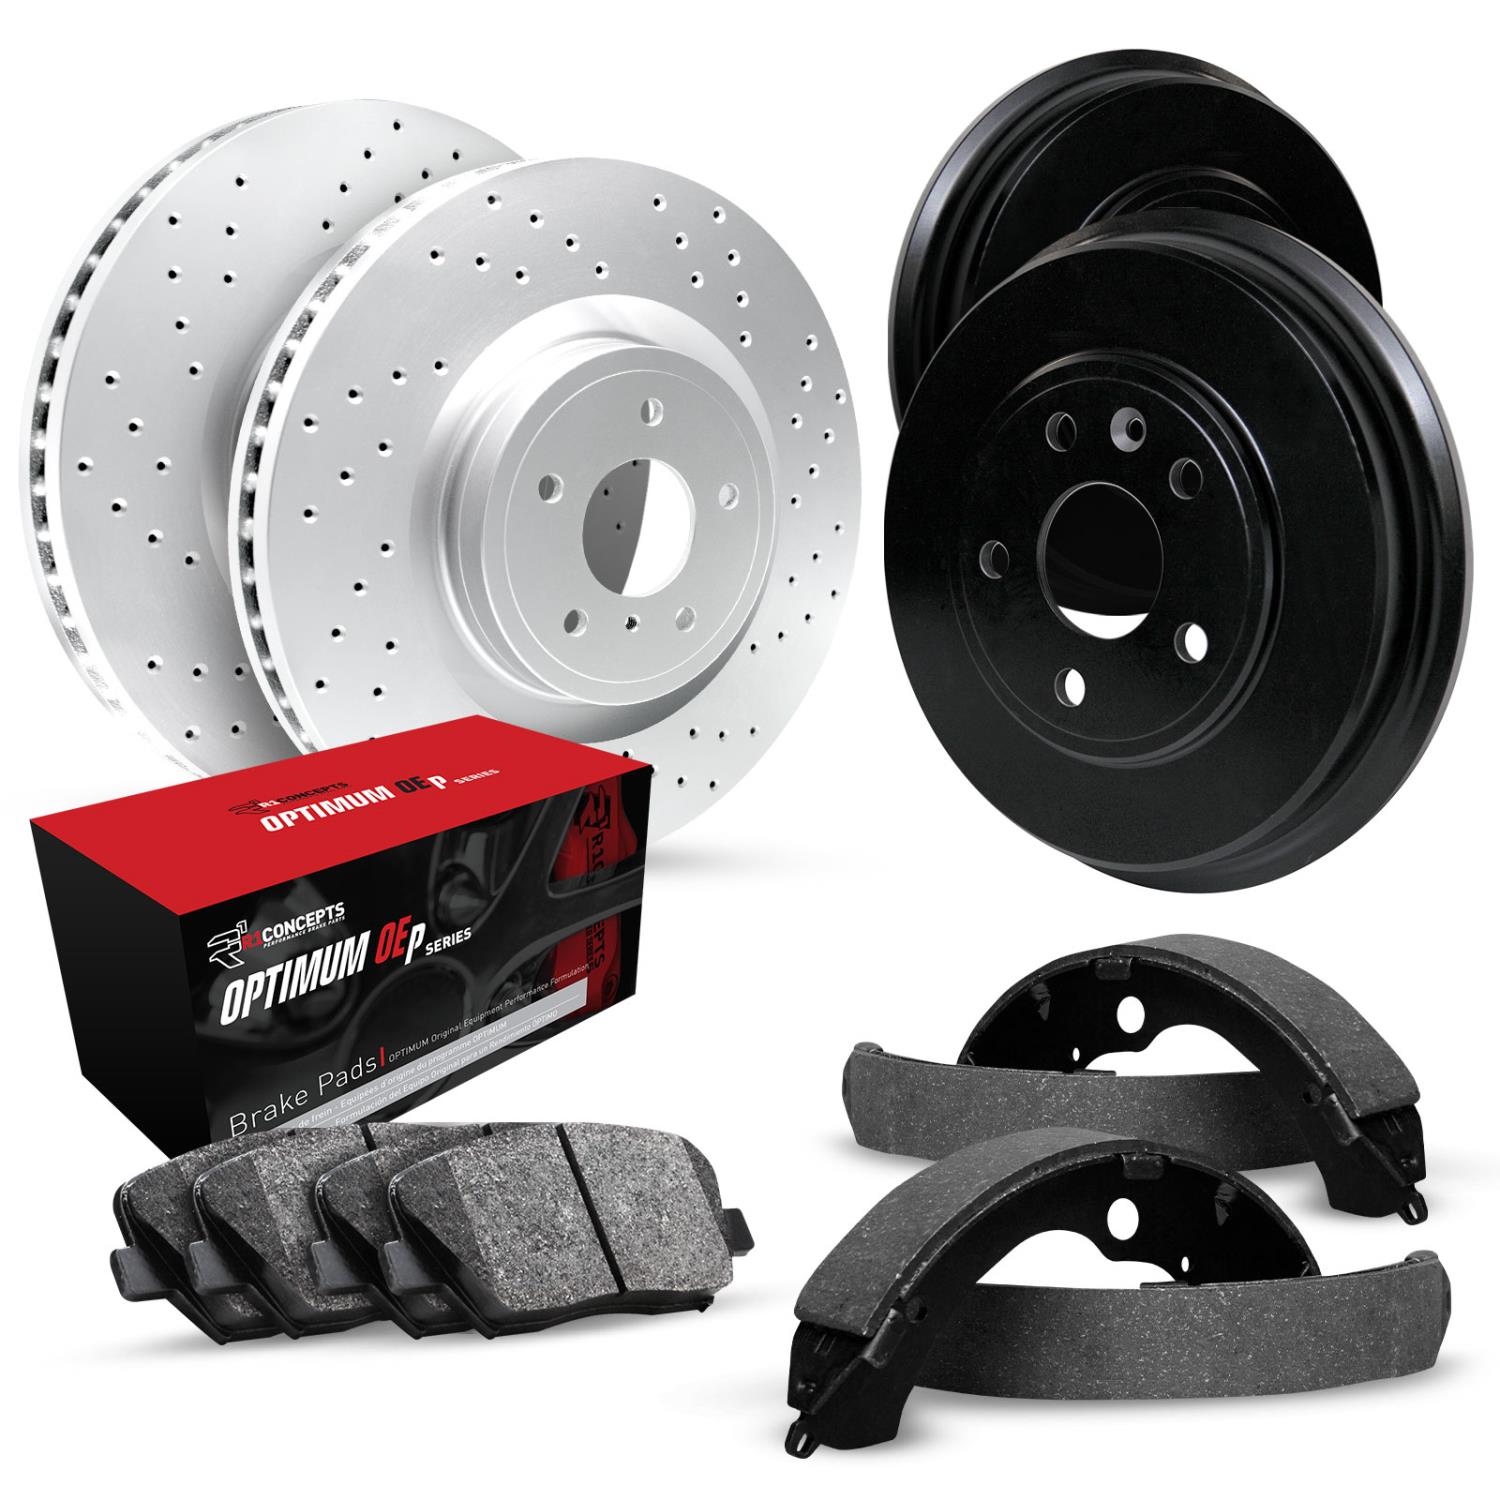 GEO-Carbon Drilled Brake Rotor & Drum Set w/Optimum OE Pads & Shoes, 1991-1994 GM, Position: Front & Rear